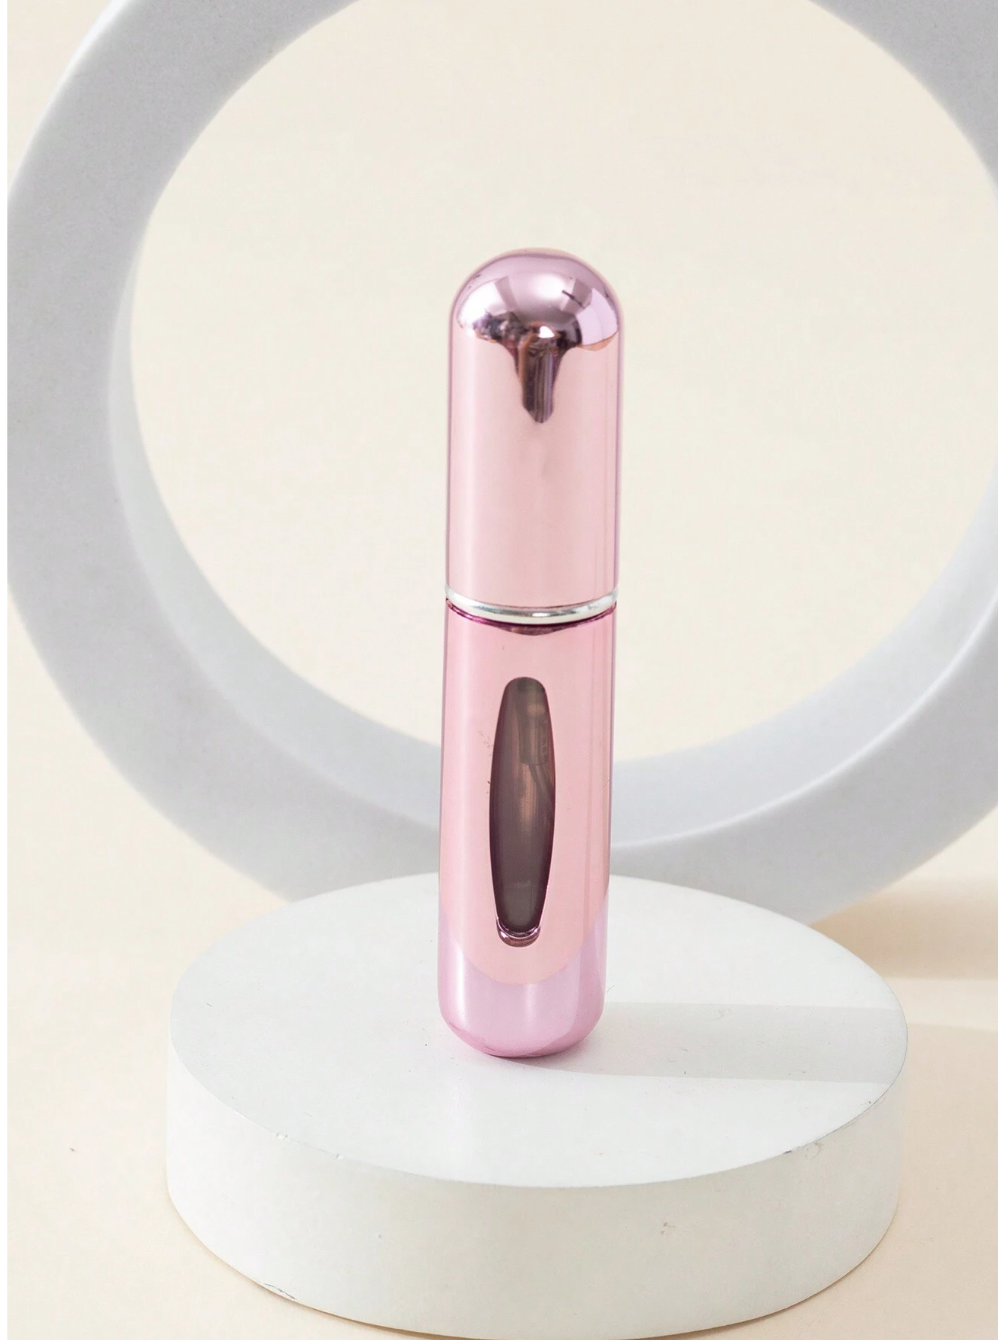 Radiant Rose: 5ml Shiny Pink Perfume Atomizer - Your Chic Travel Companion for On-the-Go Fragrance Bliss!